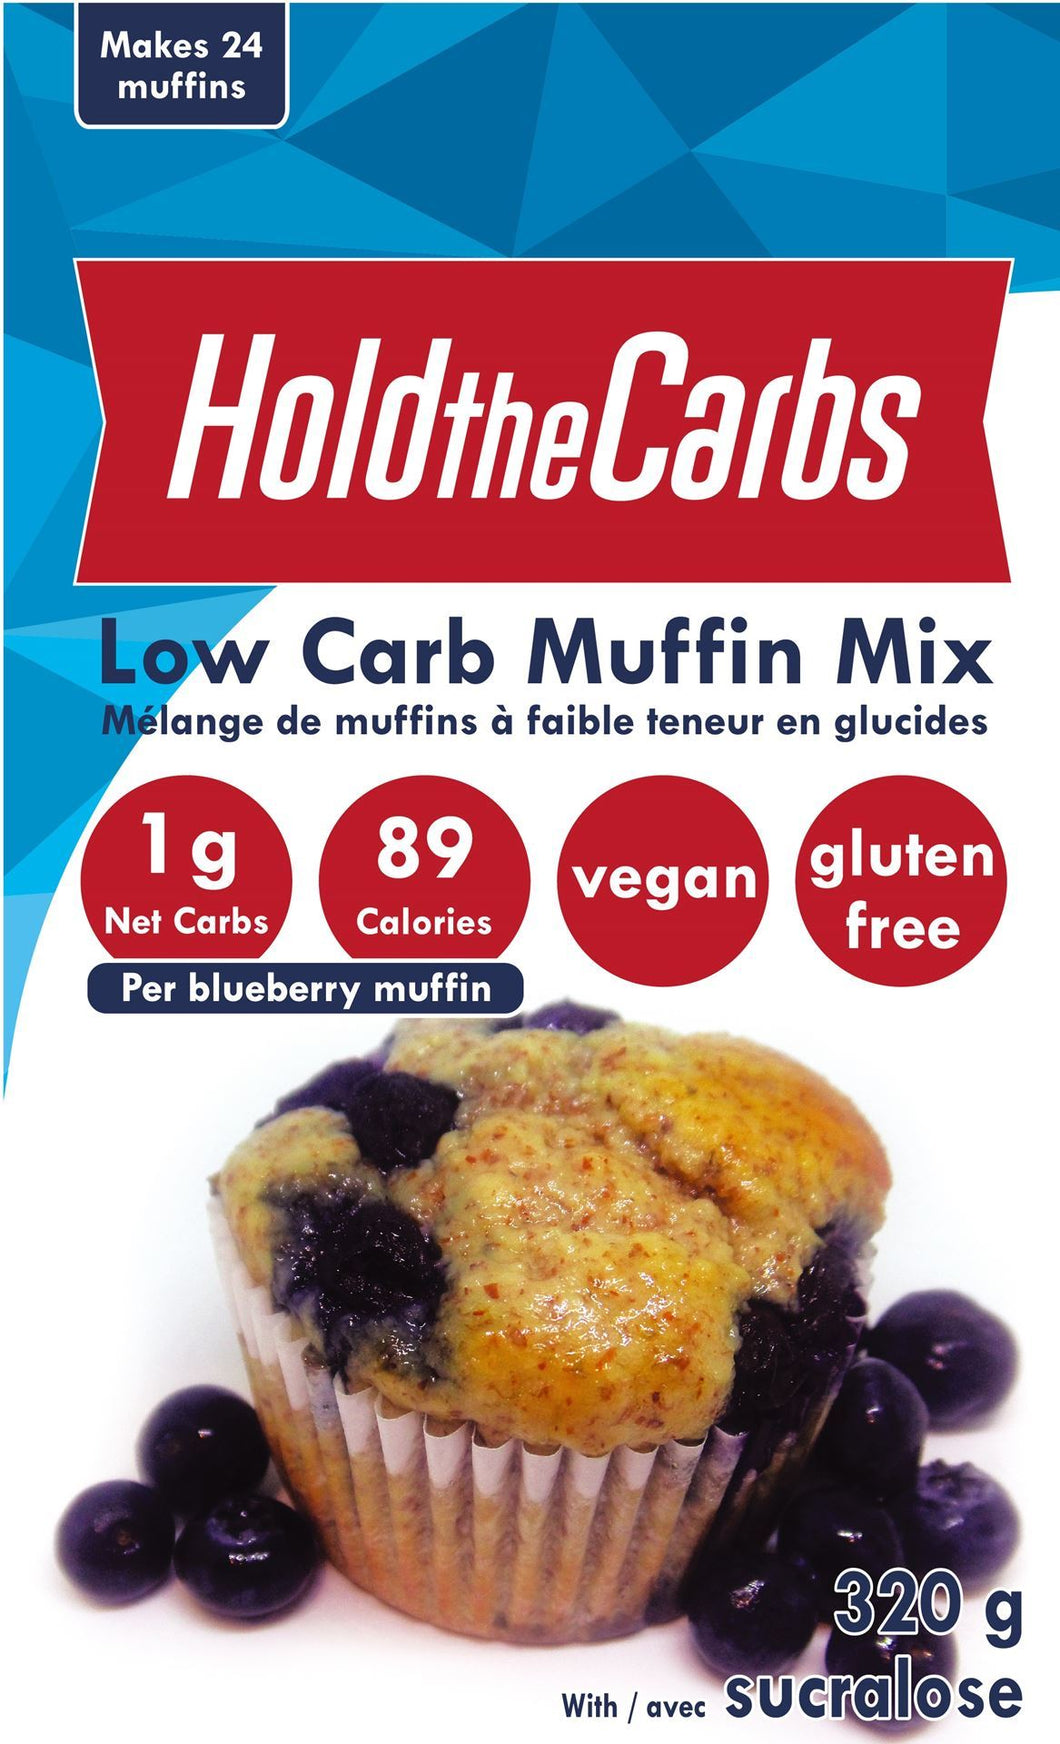 Hold the Carbs Muffin Mix